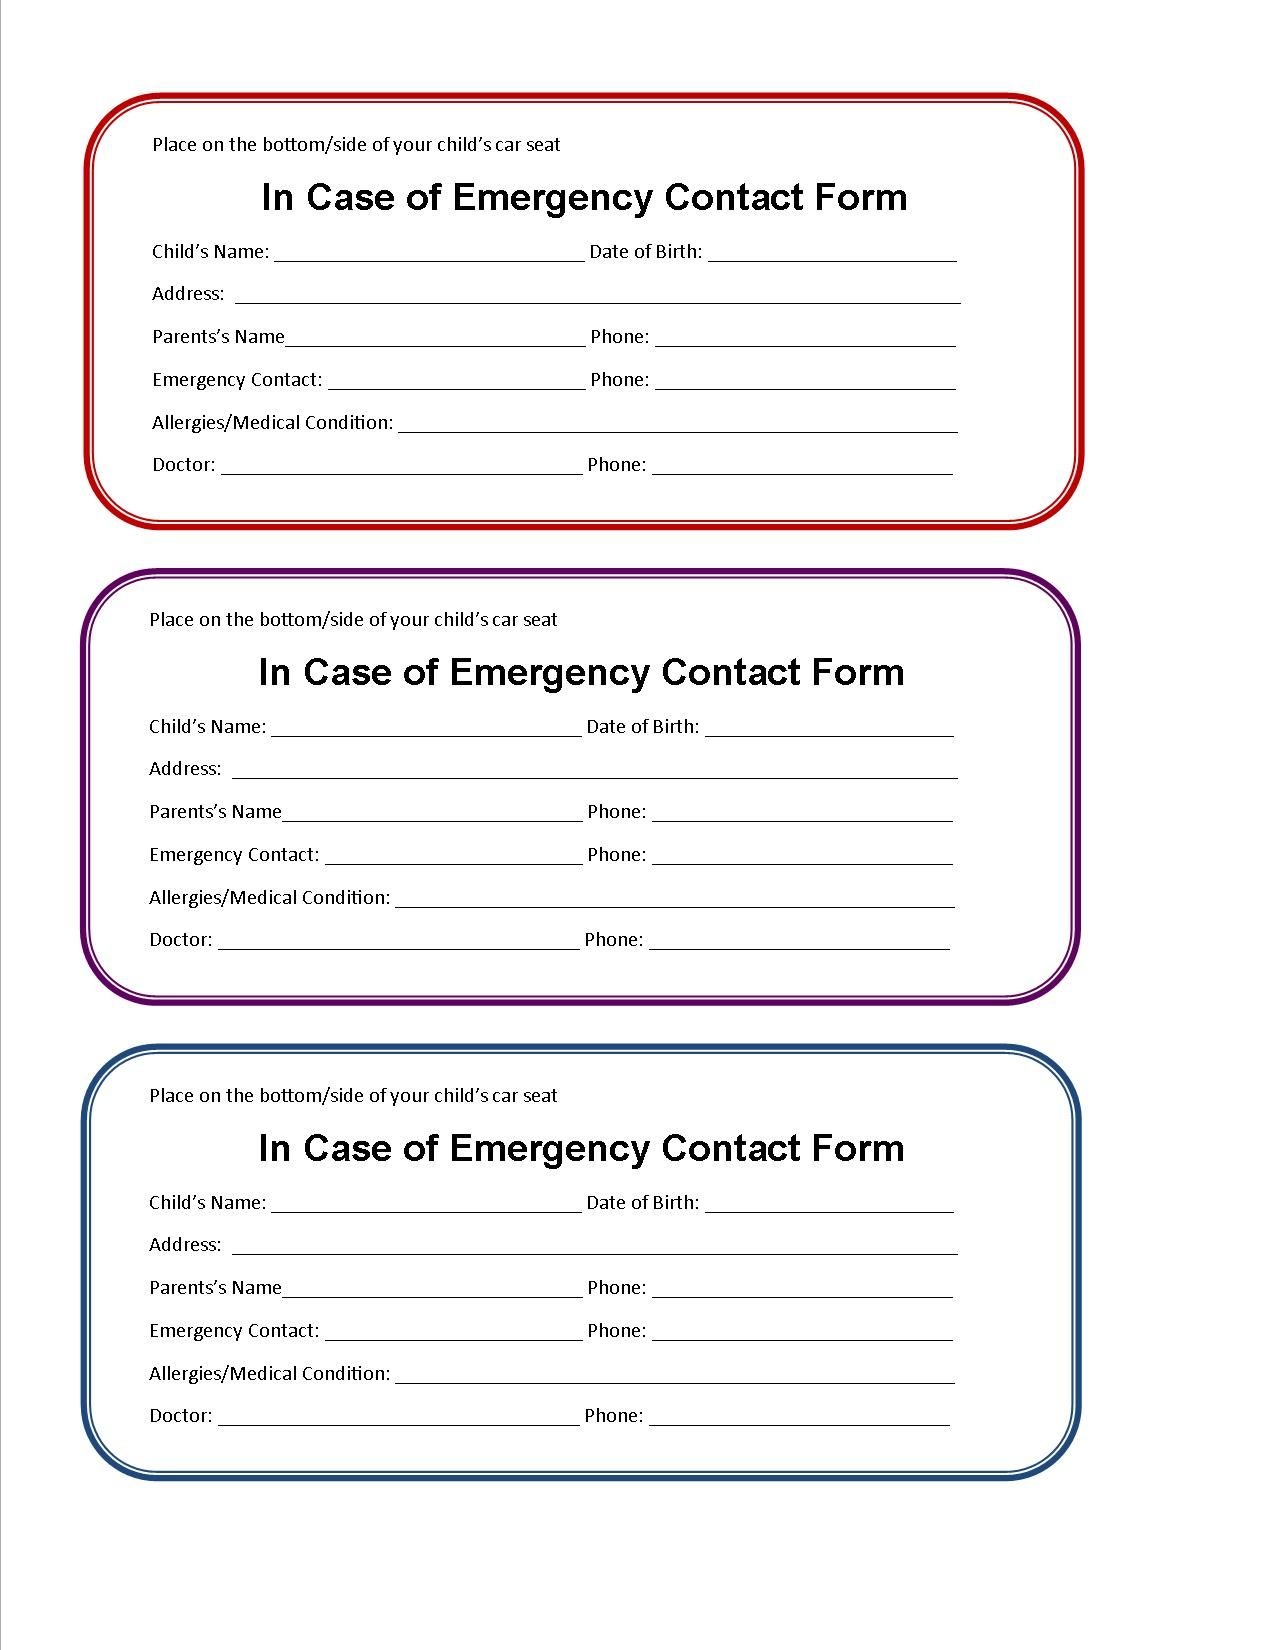 Printable Emergency Contact Form For Car Seat | Super Mom I Am - Free Printable Child Identification Card